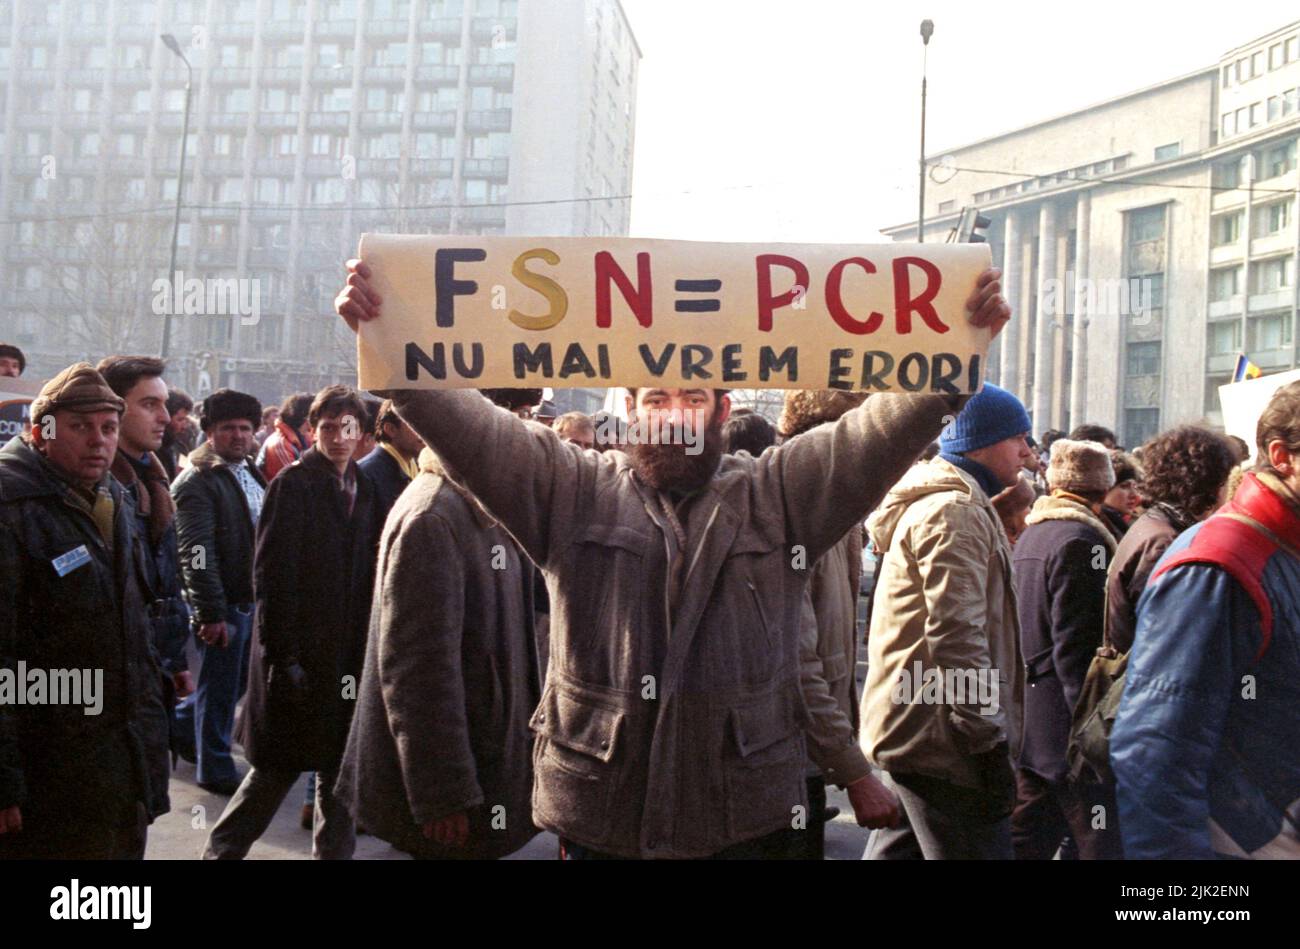 Bucharest, Romania, January 28, 1990. A month after the anti-communist revolution, supporters of the historical (right-wing) parties march against the new political party in power, F.S.N.,  composed mainly of former communist officials. A man holds a banner saying ' F.S.N.= P.C.R. (Romanian Communist Party). No more mistakes'. Stock Photo